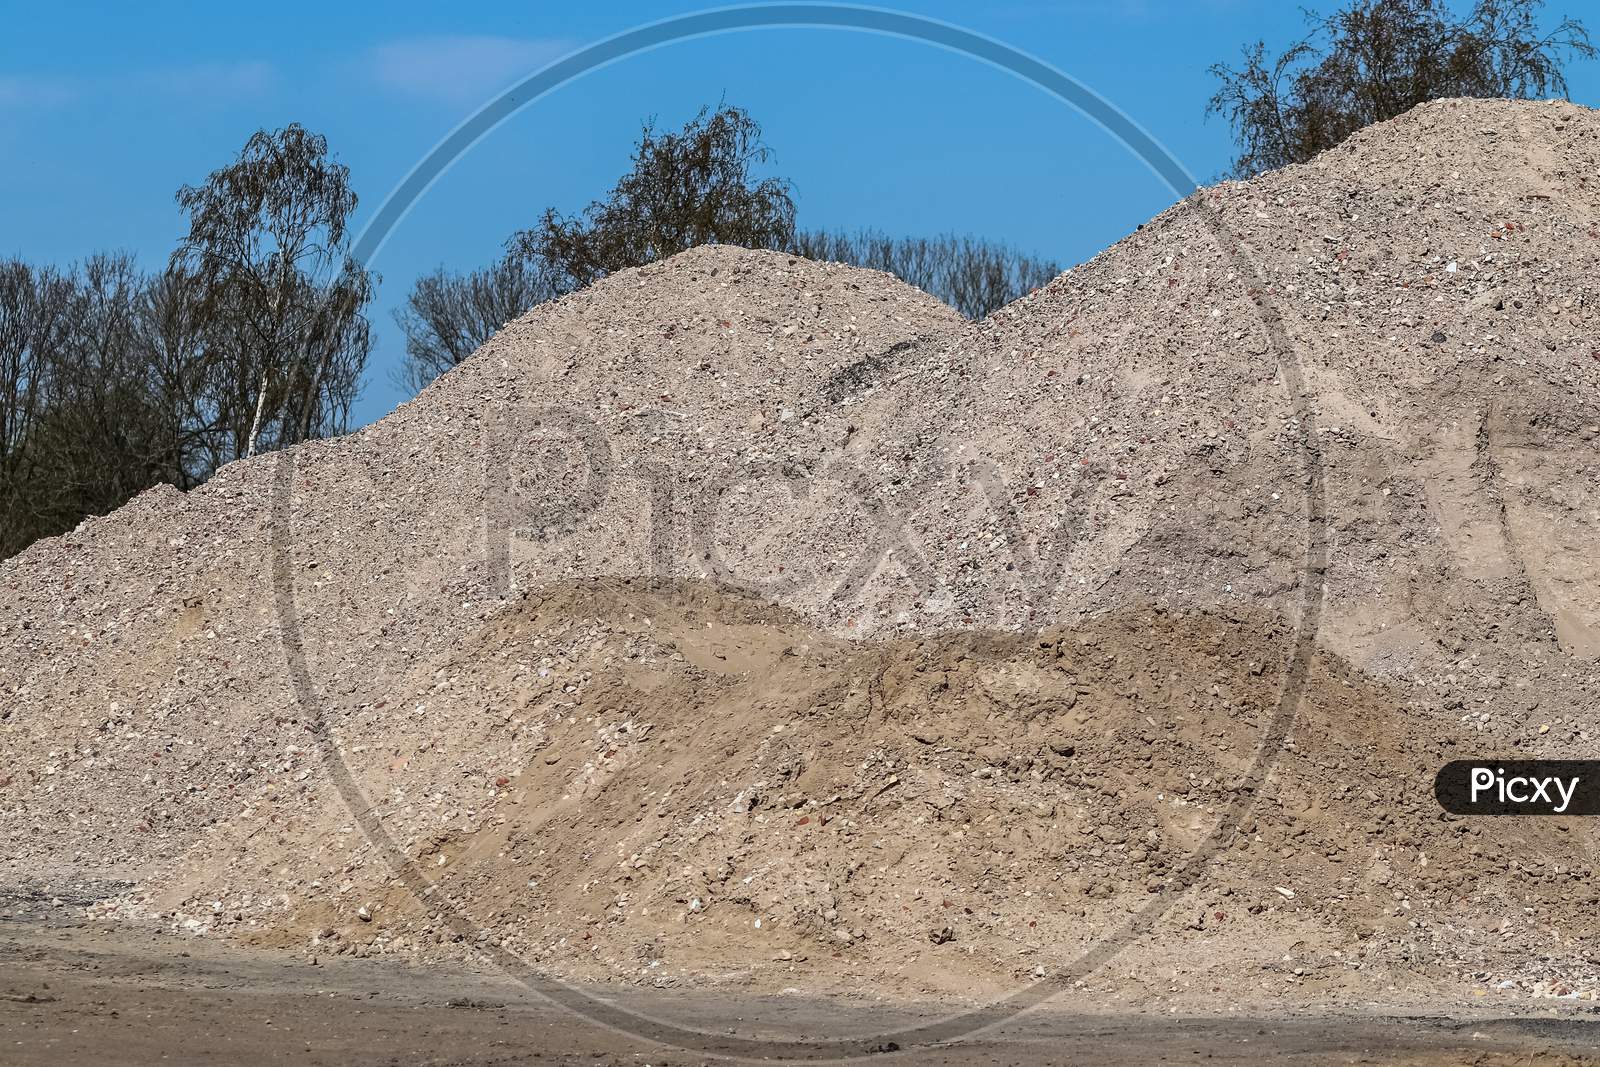 View Into A Gravel Pit With Piles Of Sand And Some Tire Tracks